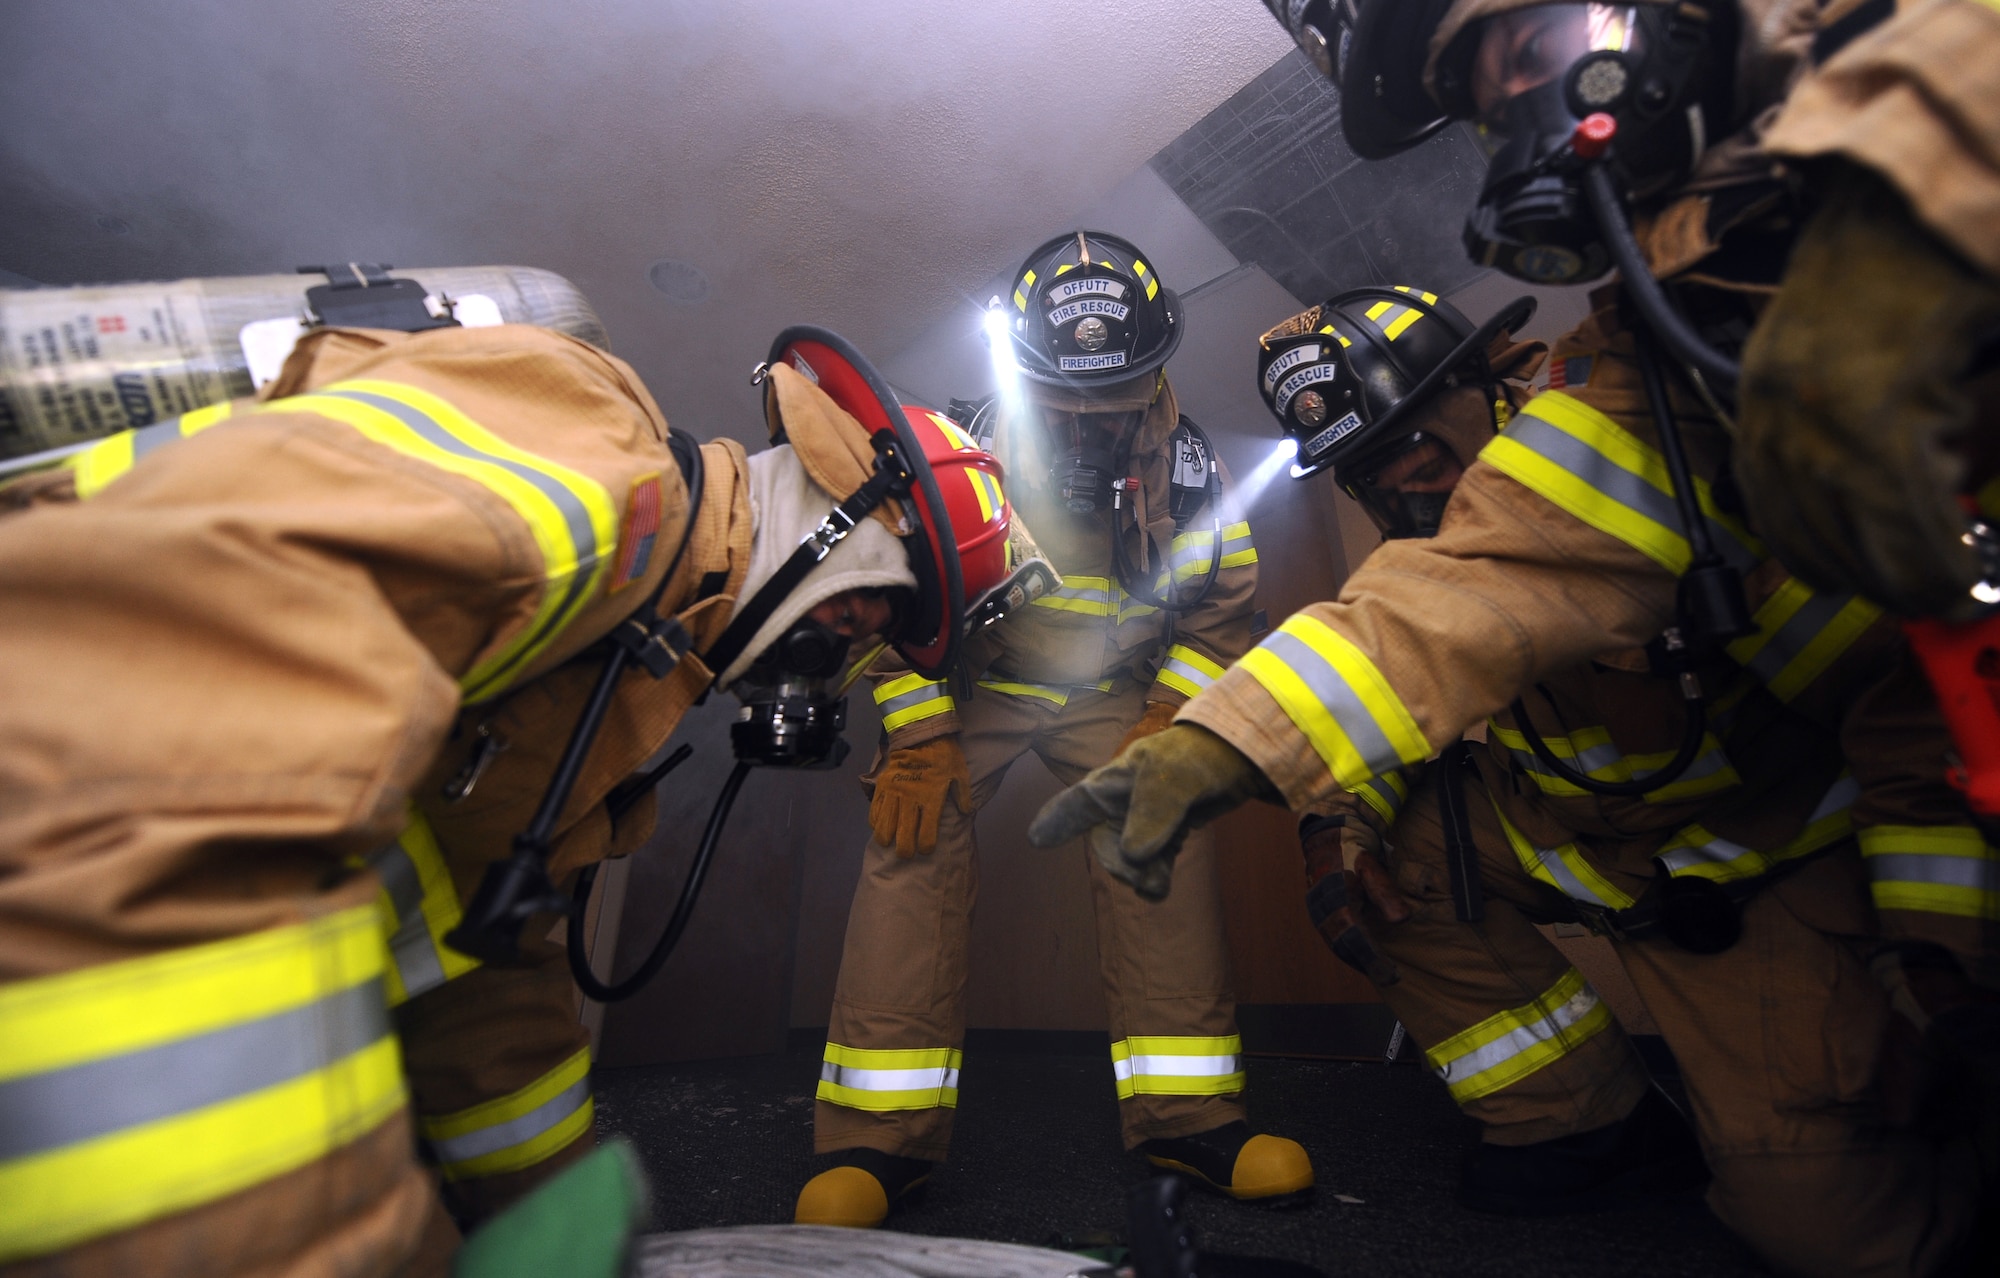 U.S. Air Force Brig. Gen. Donald Bacon (middle), 55th Wing commander, watches as a firefighter gets the hose prepared as smoke quickly descends on them from the ceiling as part of a training exercise located in the vacant McCoy Hall at Offutt Air Force Base, Neb., March 7.  The training allowed Bacon to experience the firefighter's rigorous training and witness the firefighters in action.  (U.S. Air Force photo by Josh Plueger/Released).